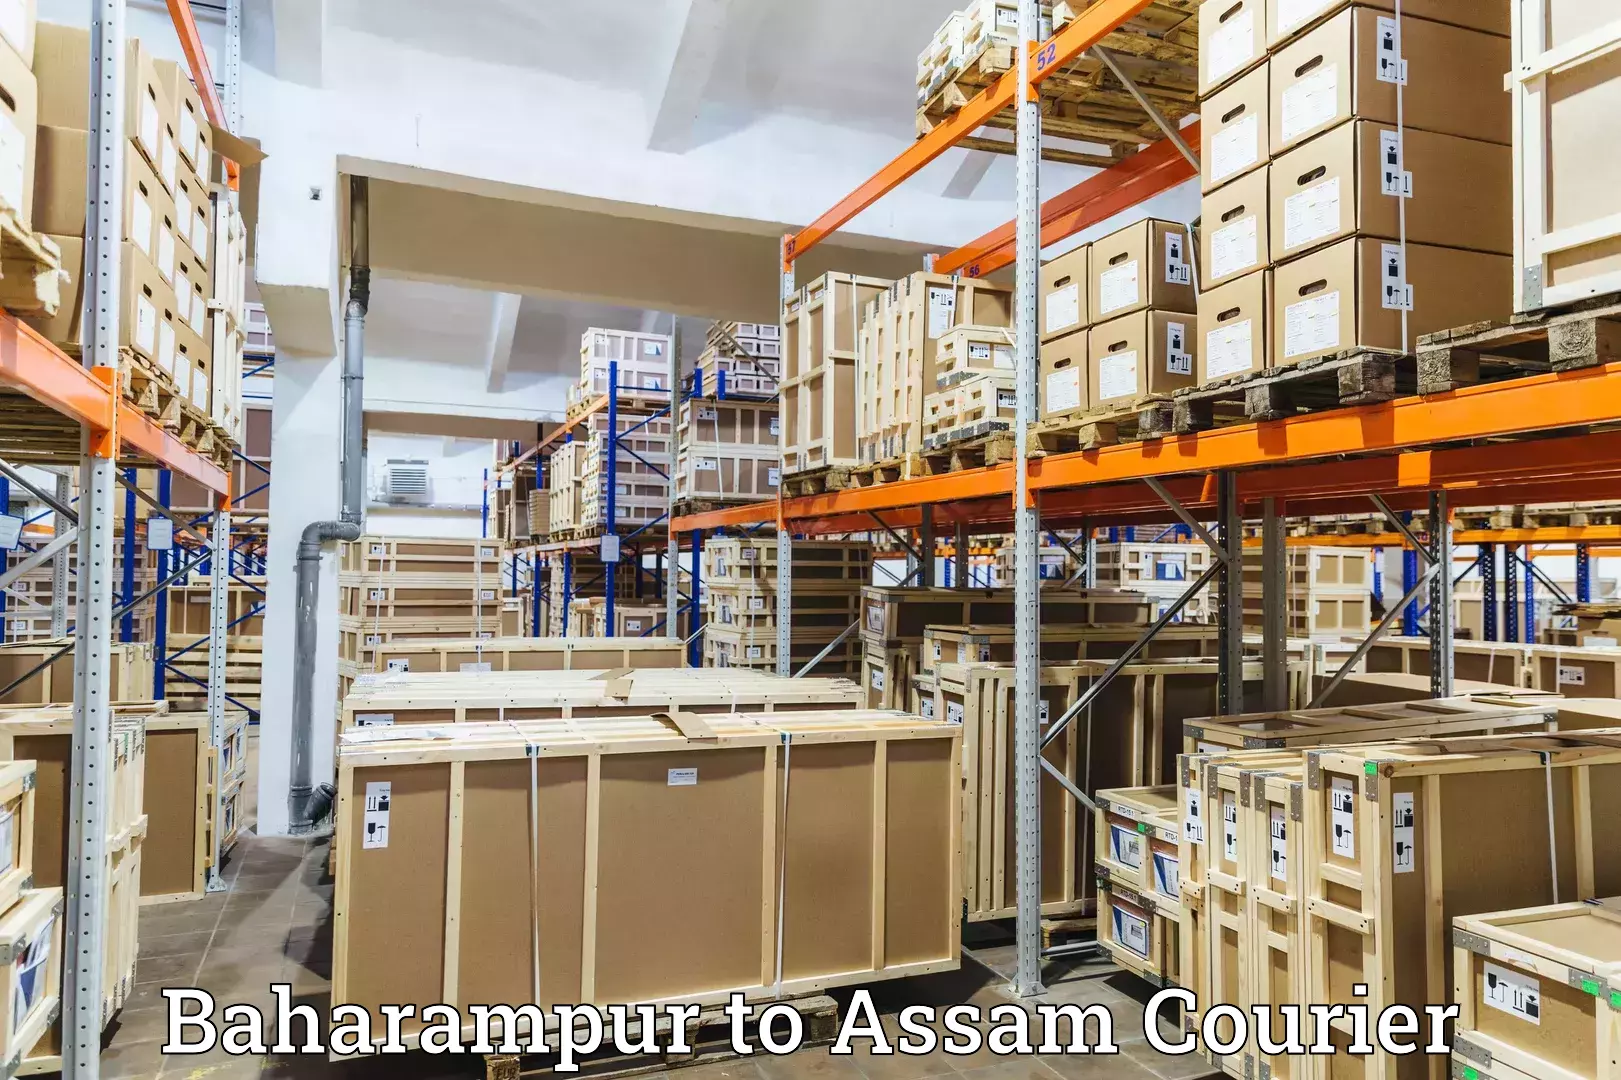 Advanced courier platforms in Baharampur to Rupai Siding